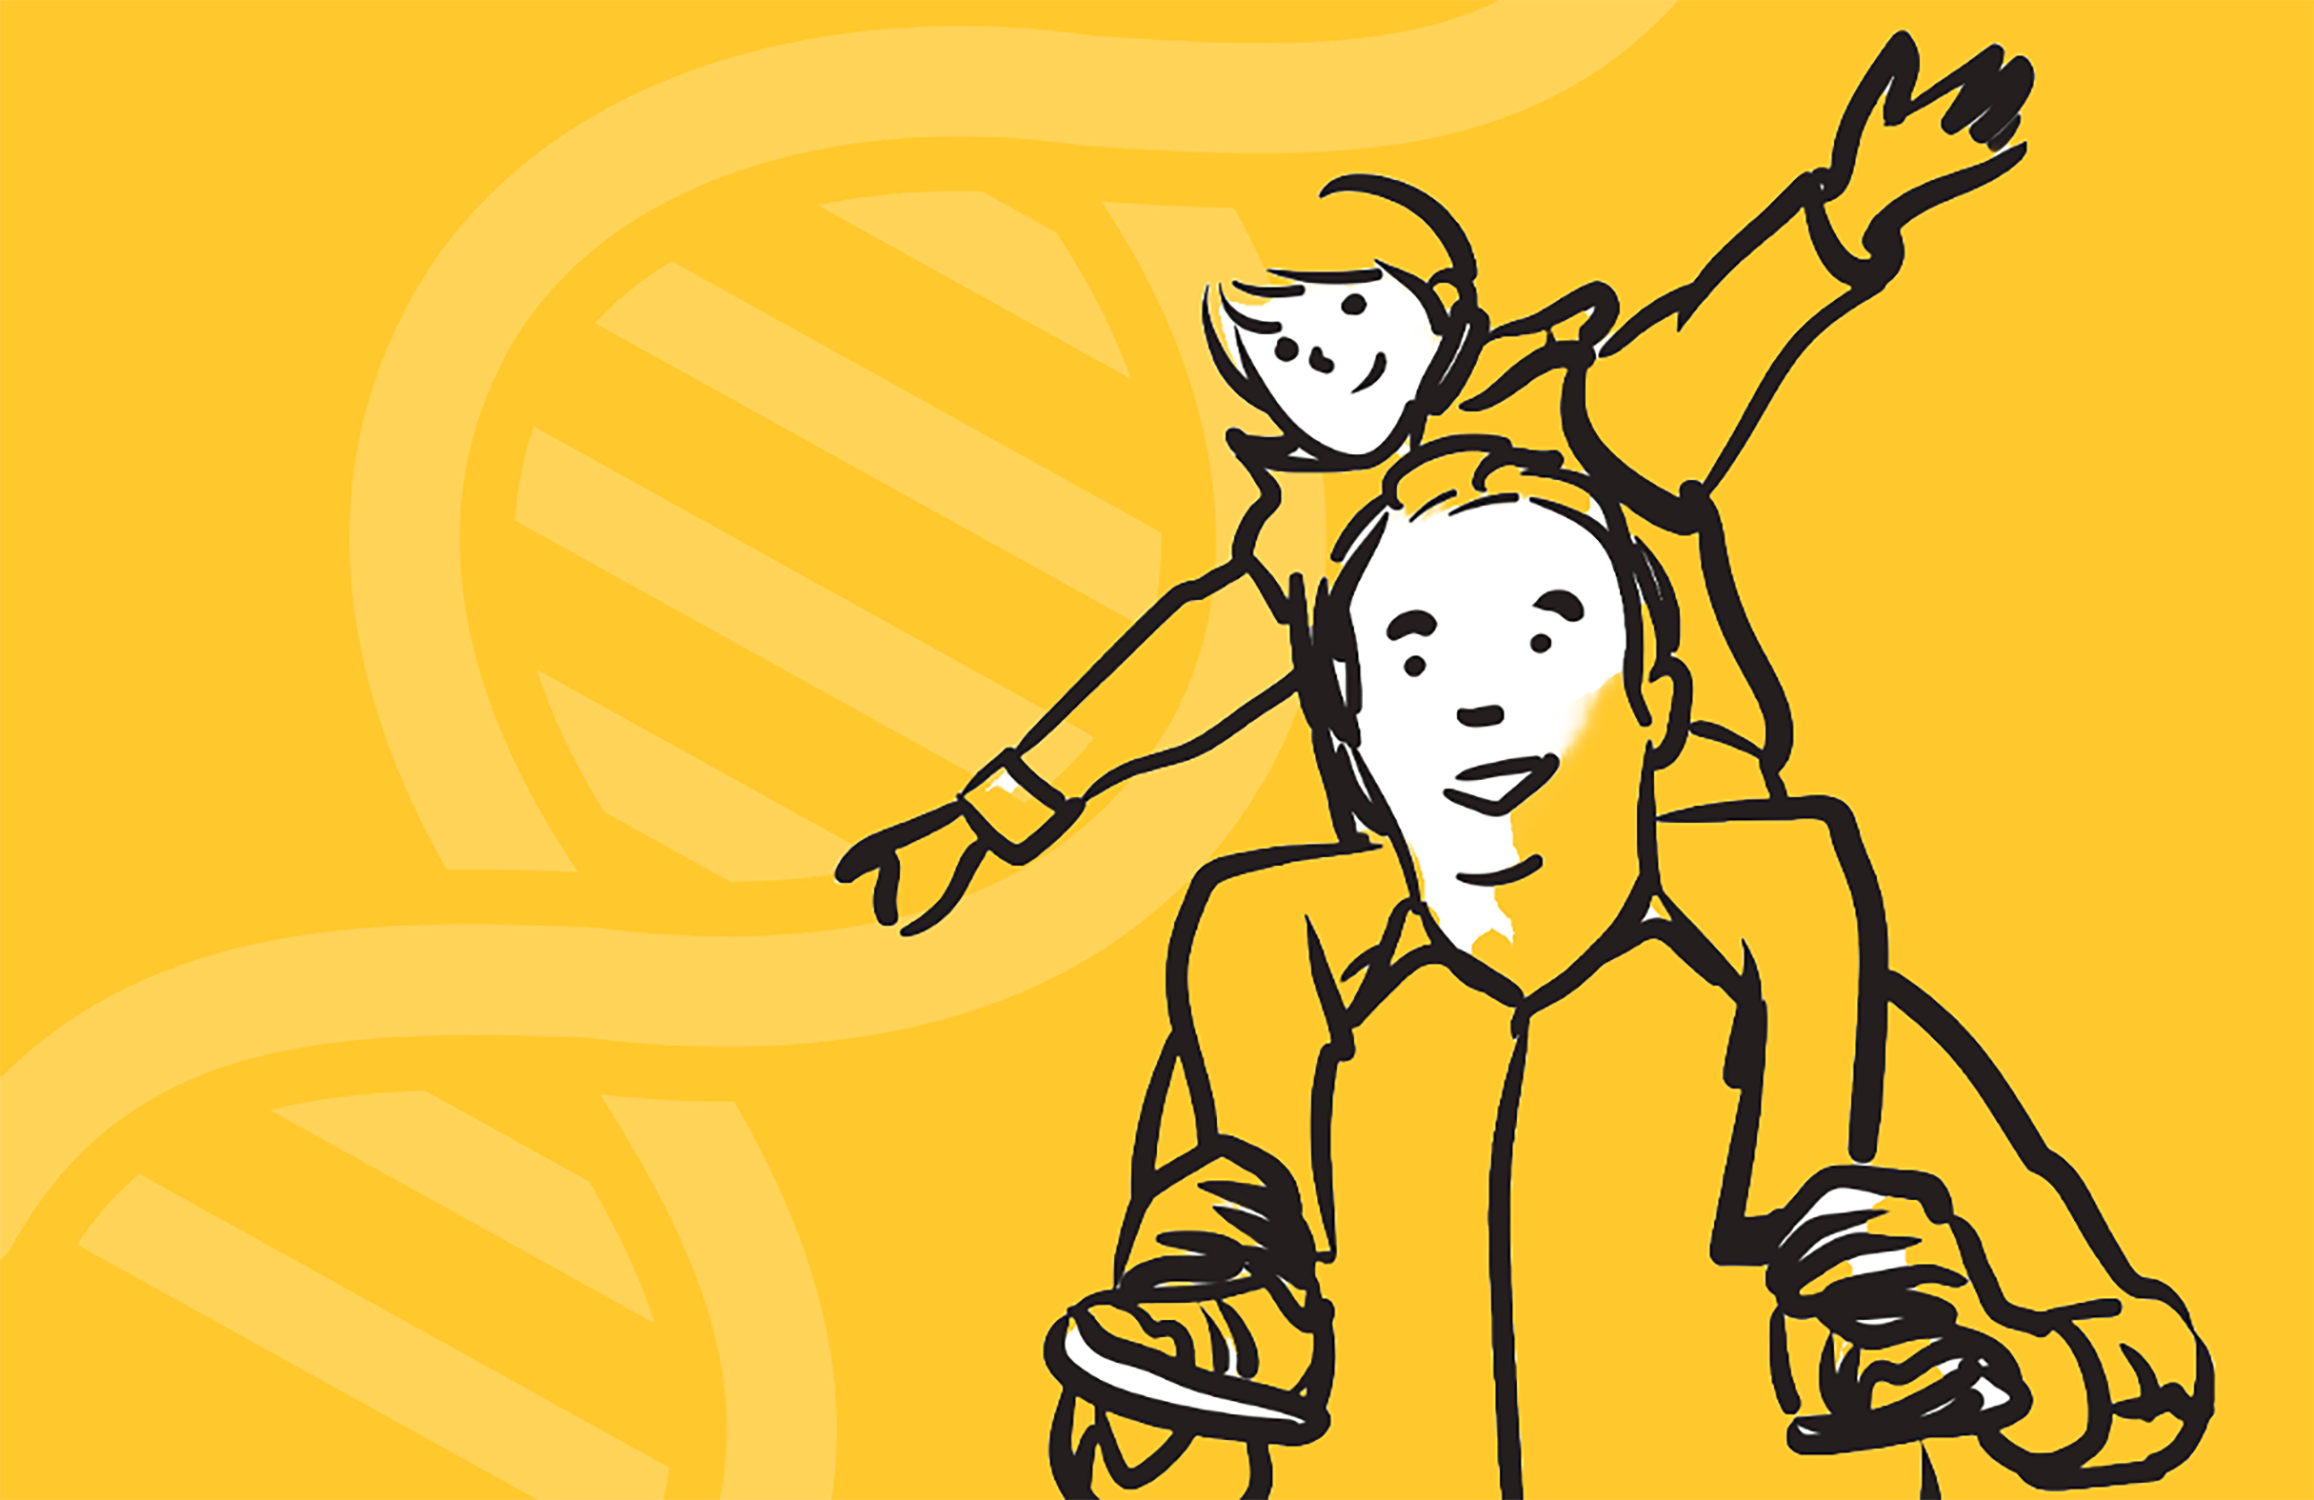 "A man holds a child on his shoulders against a yellow background"